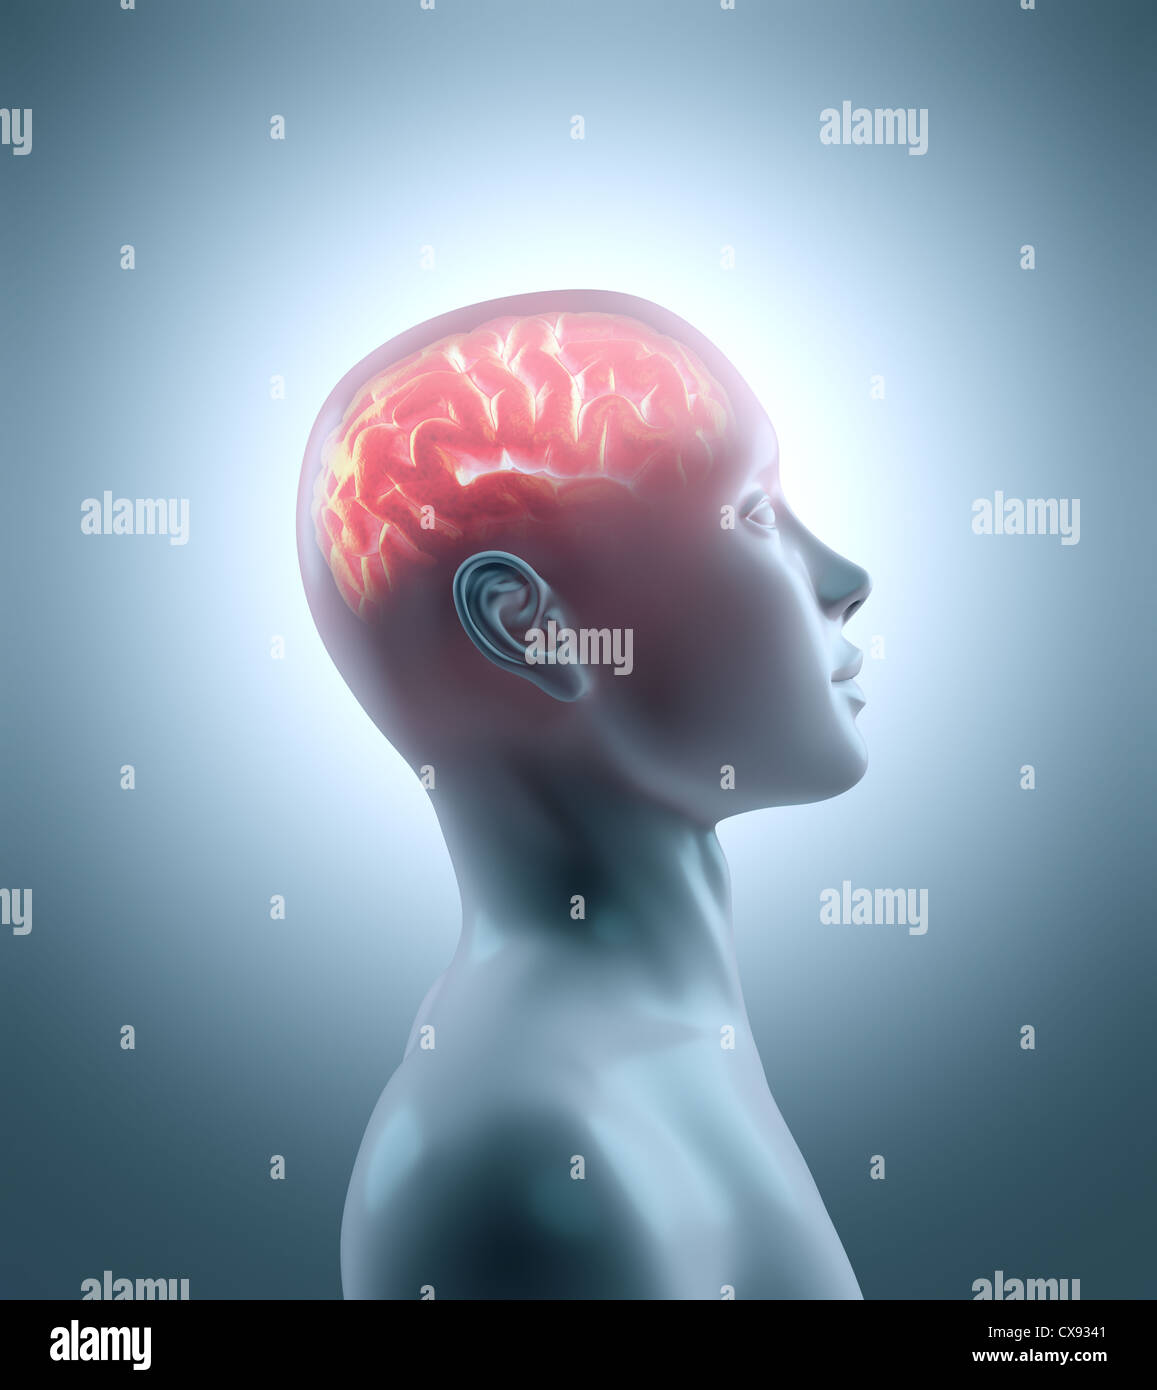 Hot brain in a cold body. Concept of technology, cyborg, brainstorm and intelligence Stock Photo